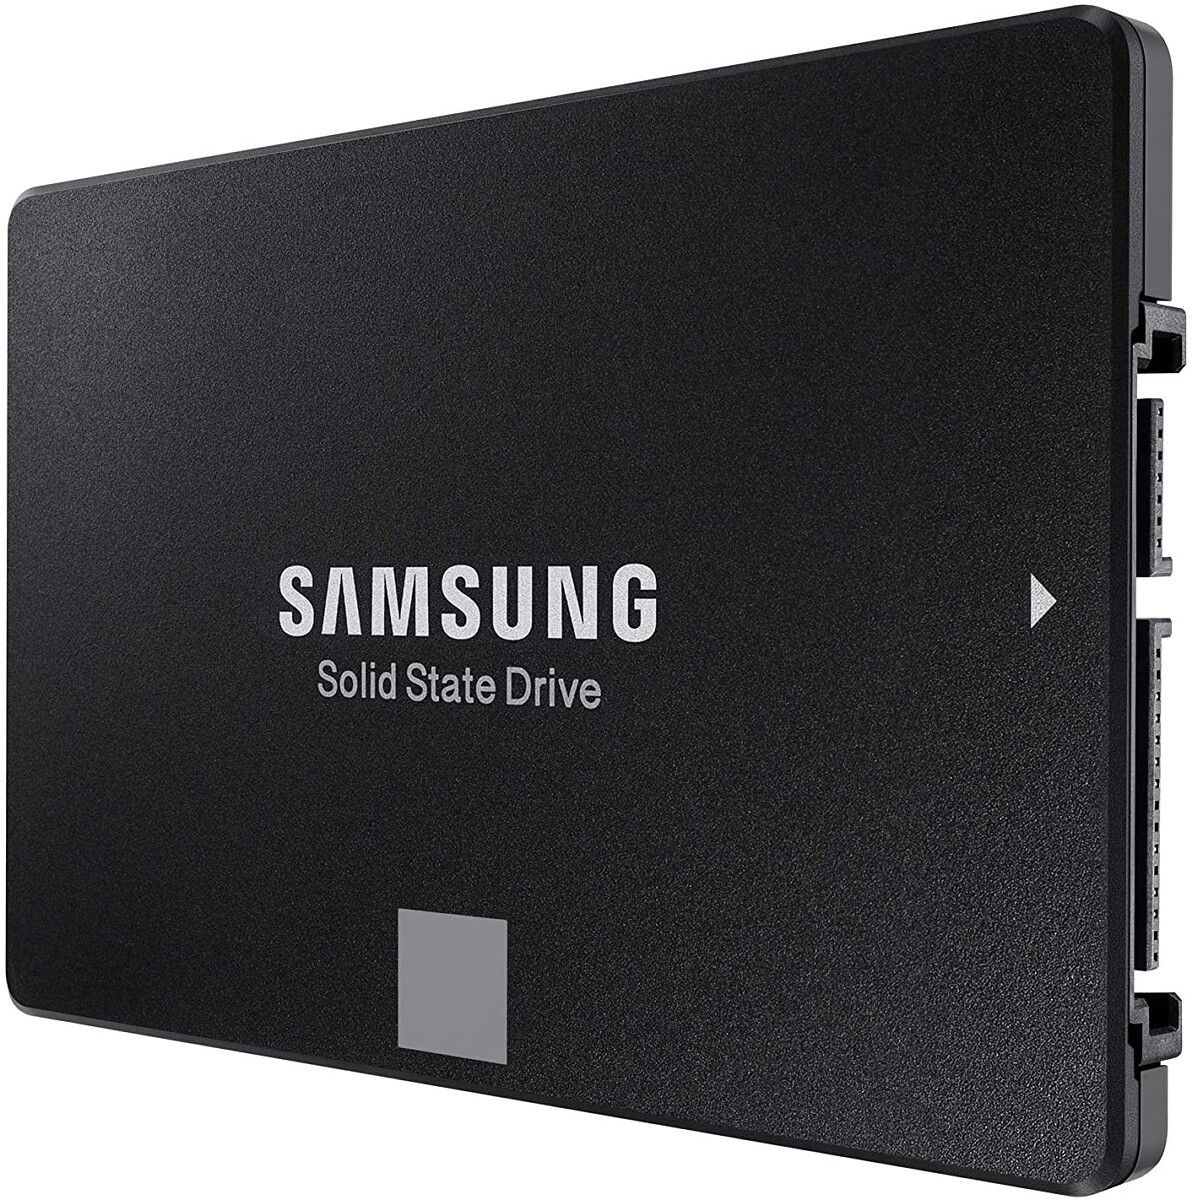 Need an SSD in your desktop or laptop? Look no further than Samsung's EVO internal SSD! The 500GB model is on sale today for just $54, and it'll provide you enough space for your OS and applications, and maybe even a game or two.